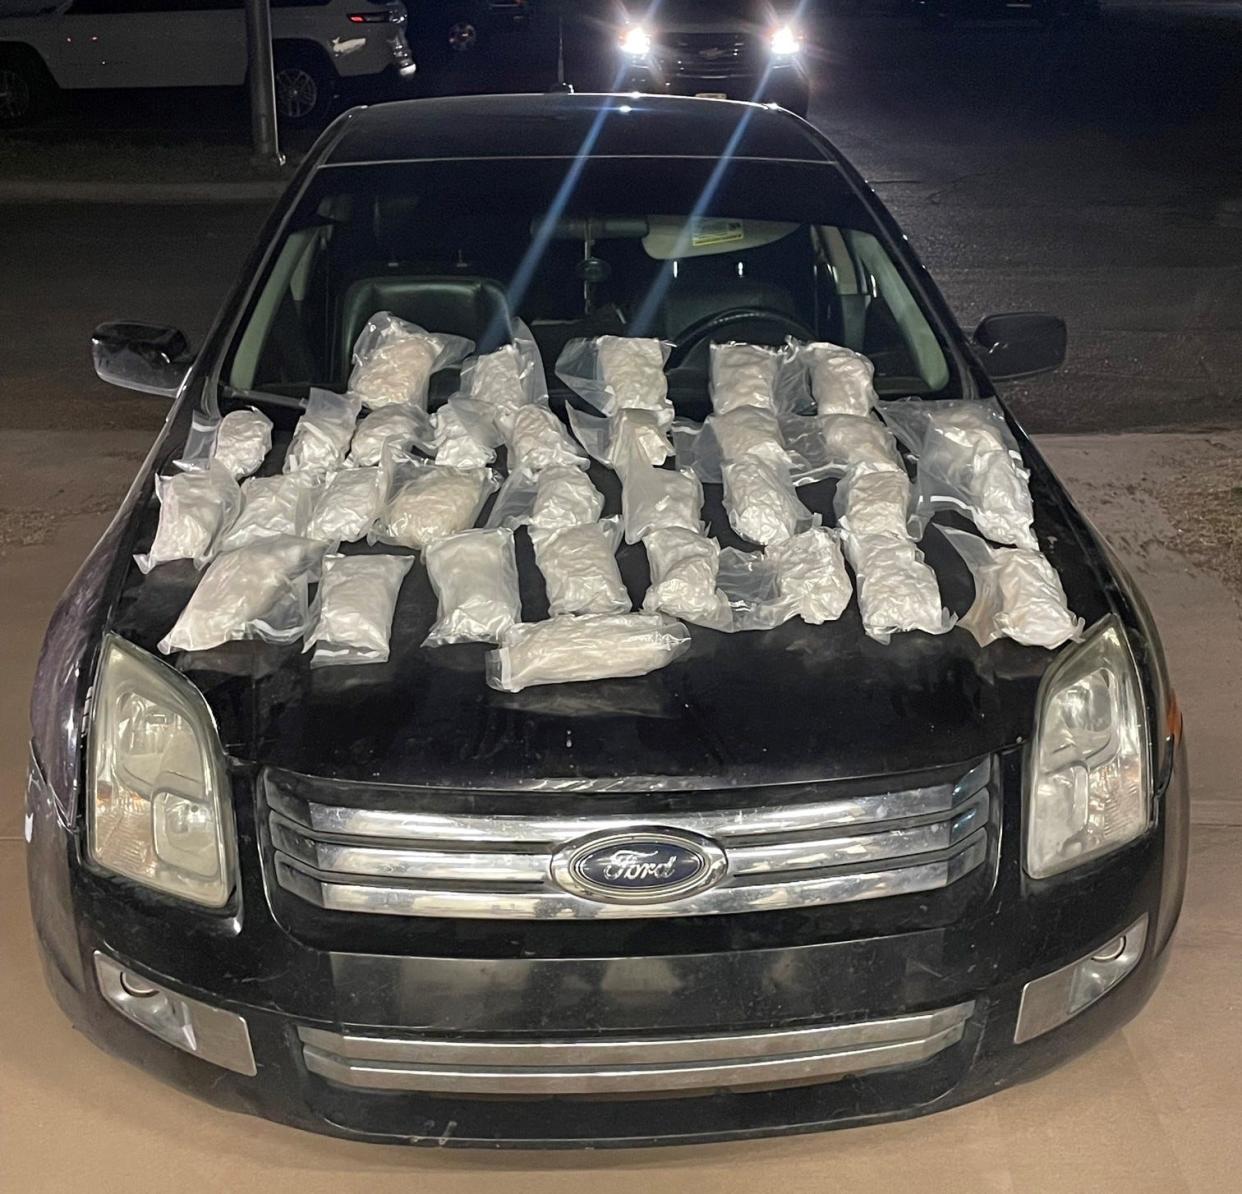 Approximately 37 pounds of methamphetamine were seized by law enforcement during an April 11 traffic stop near Odessa.